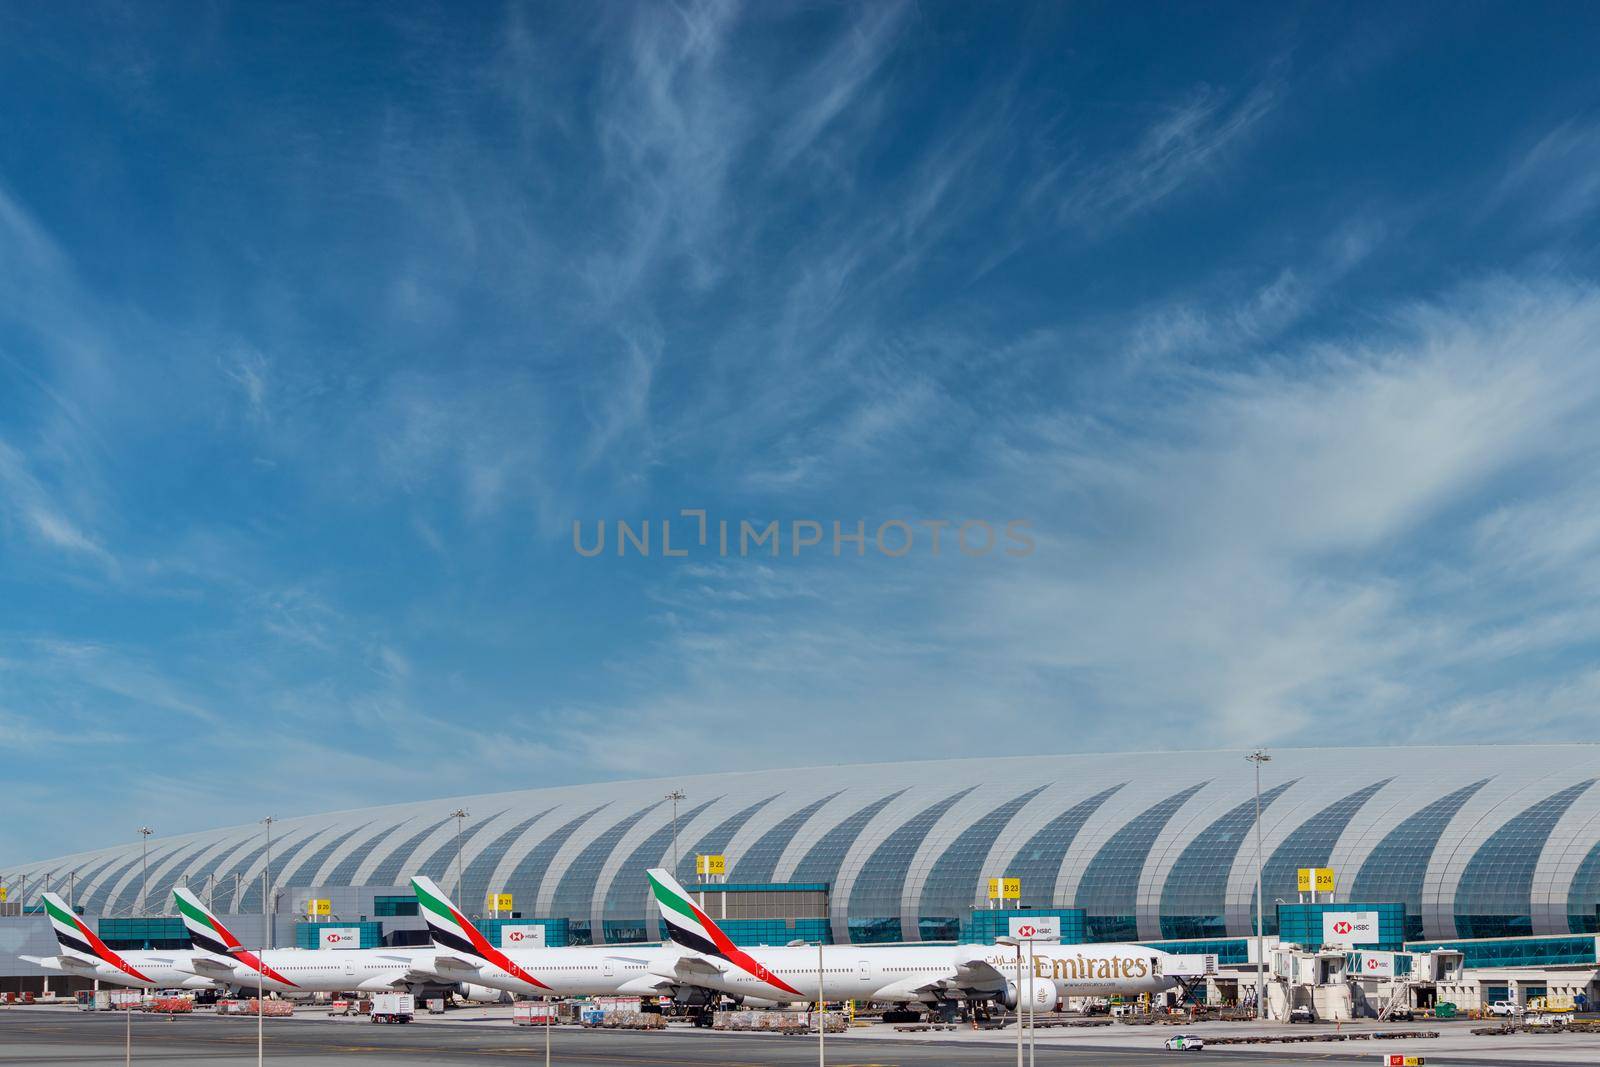 DUBAI, UAE - CIRCA 2021: Emirates Airline Airplanes parked on Dubai Airport, on cloudy sky background.Emirates Airline Airplanes parked on Dubai Airport, on cloudy sky background. by dugulan